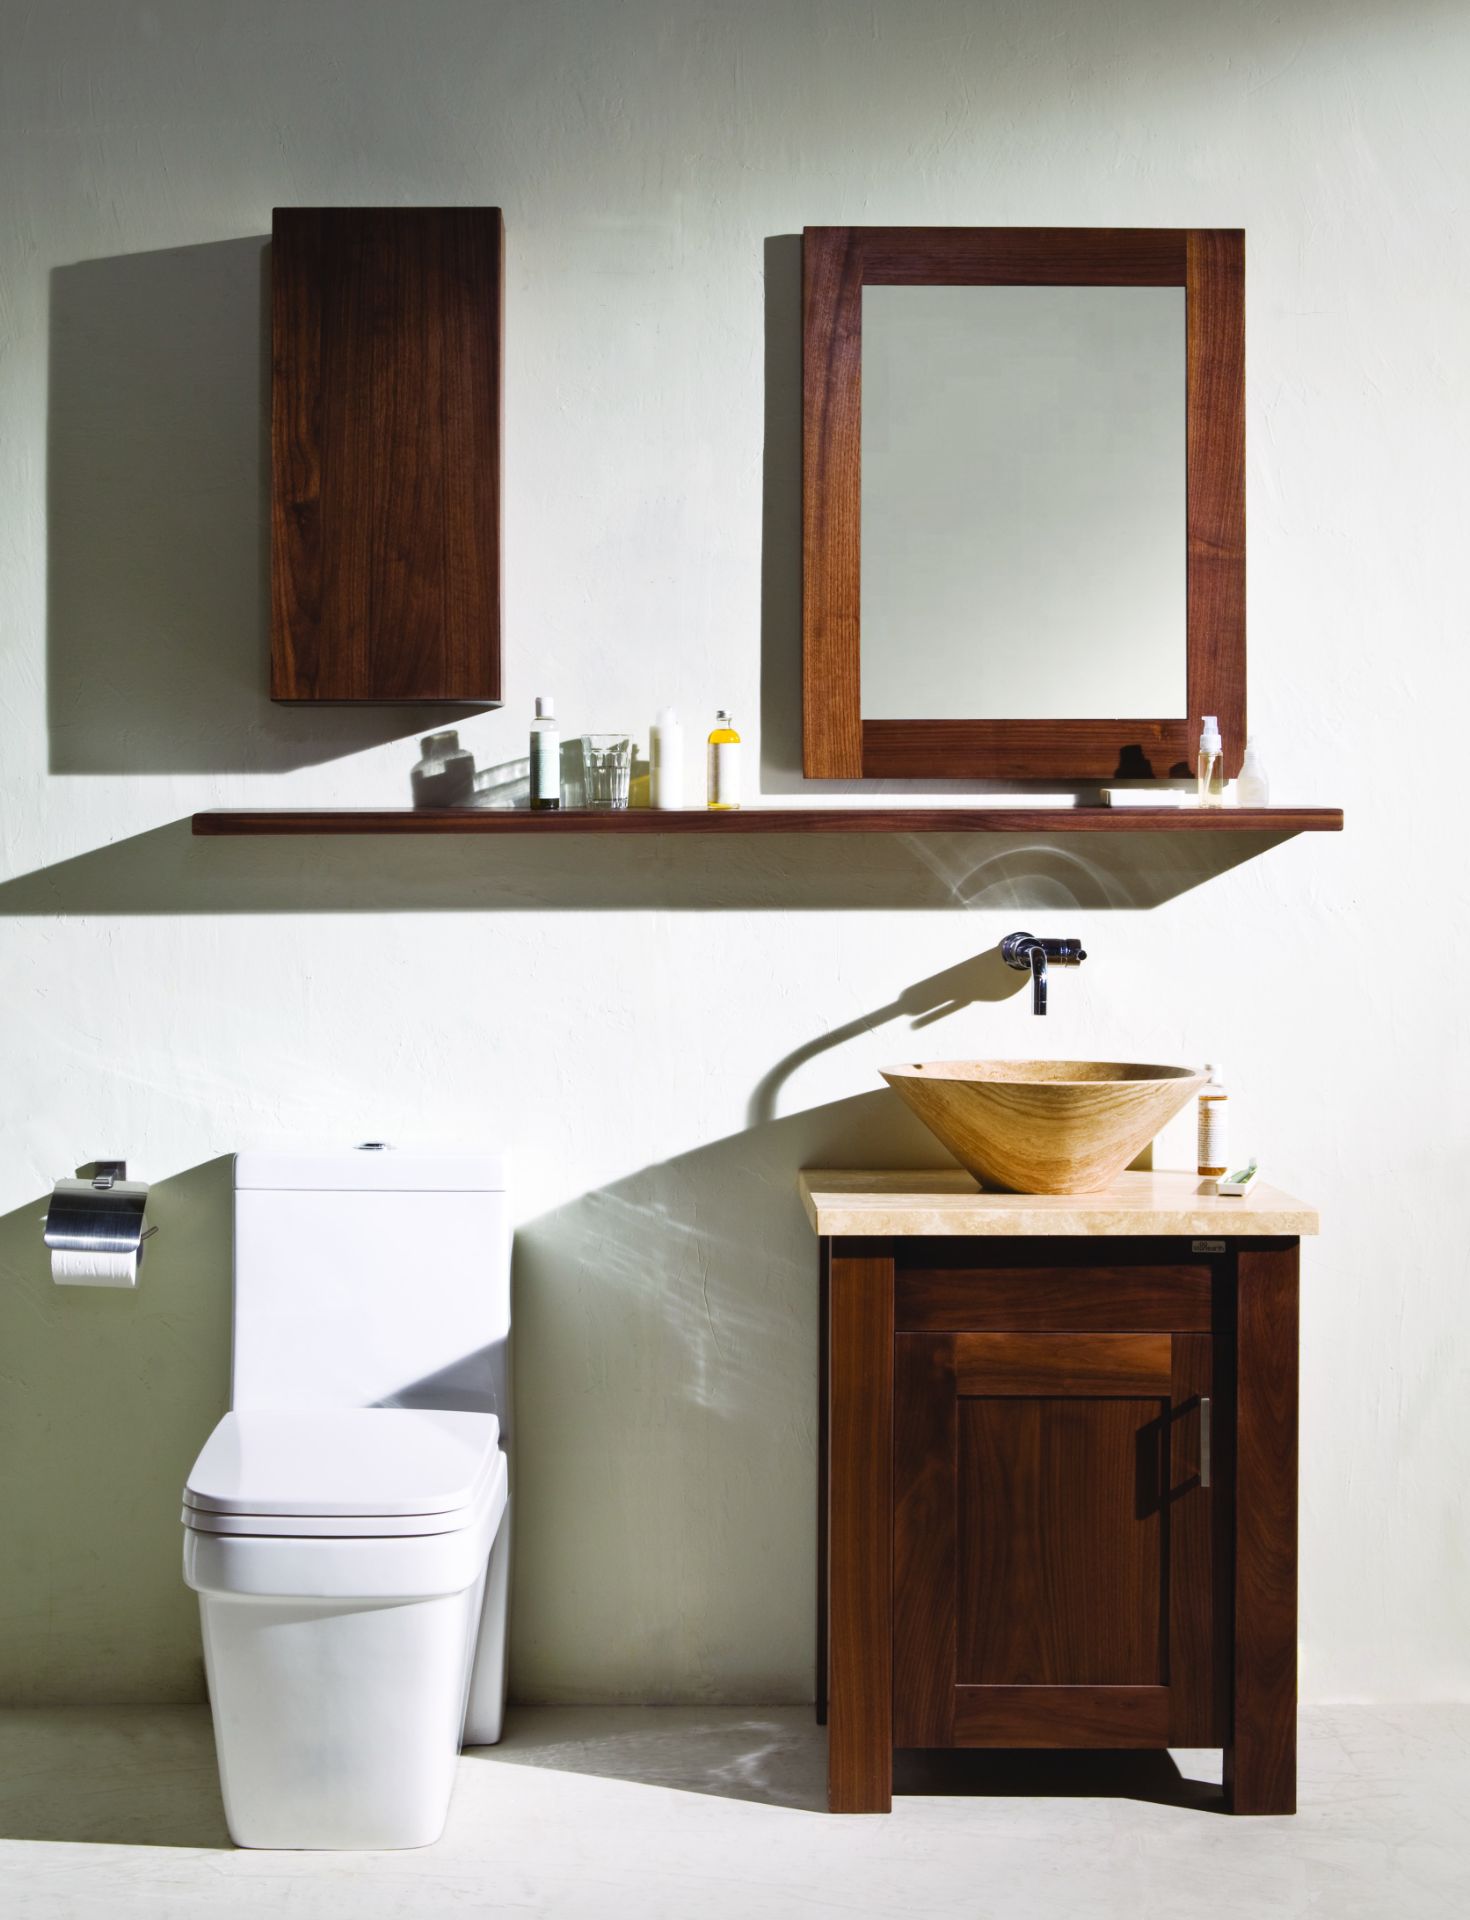 1 x Stonearth Bathroom Storage Shelf With Concealed Brackets - American Solid Walnut - Size: 750mm - Image 4 of 16